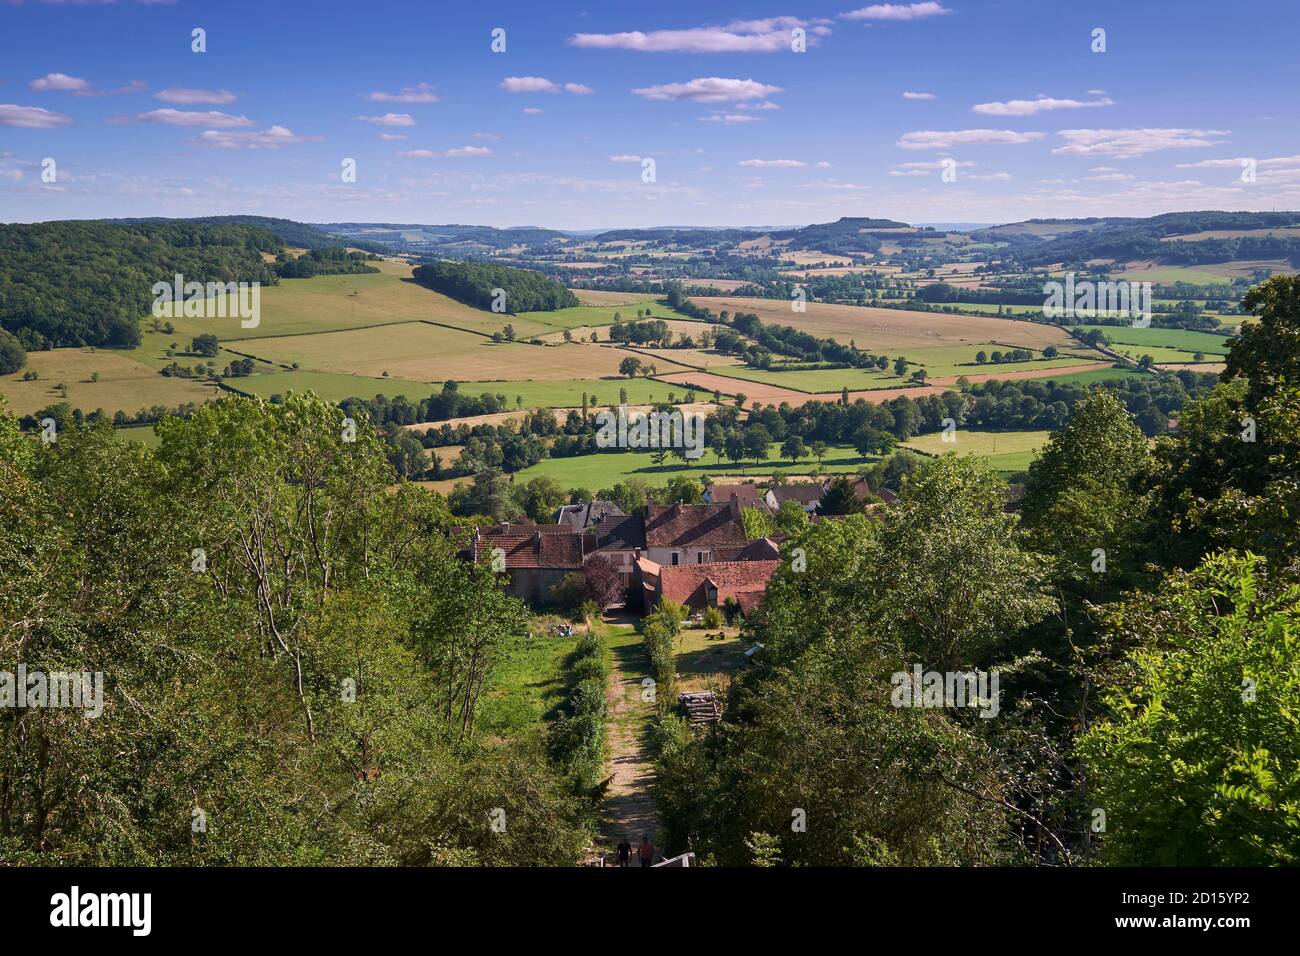 France, Cote d'Or, Alise Sainte Reine, general view from the top of Mont Auxois Stock Photo